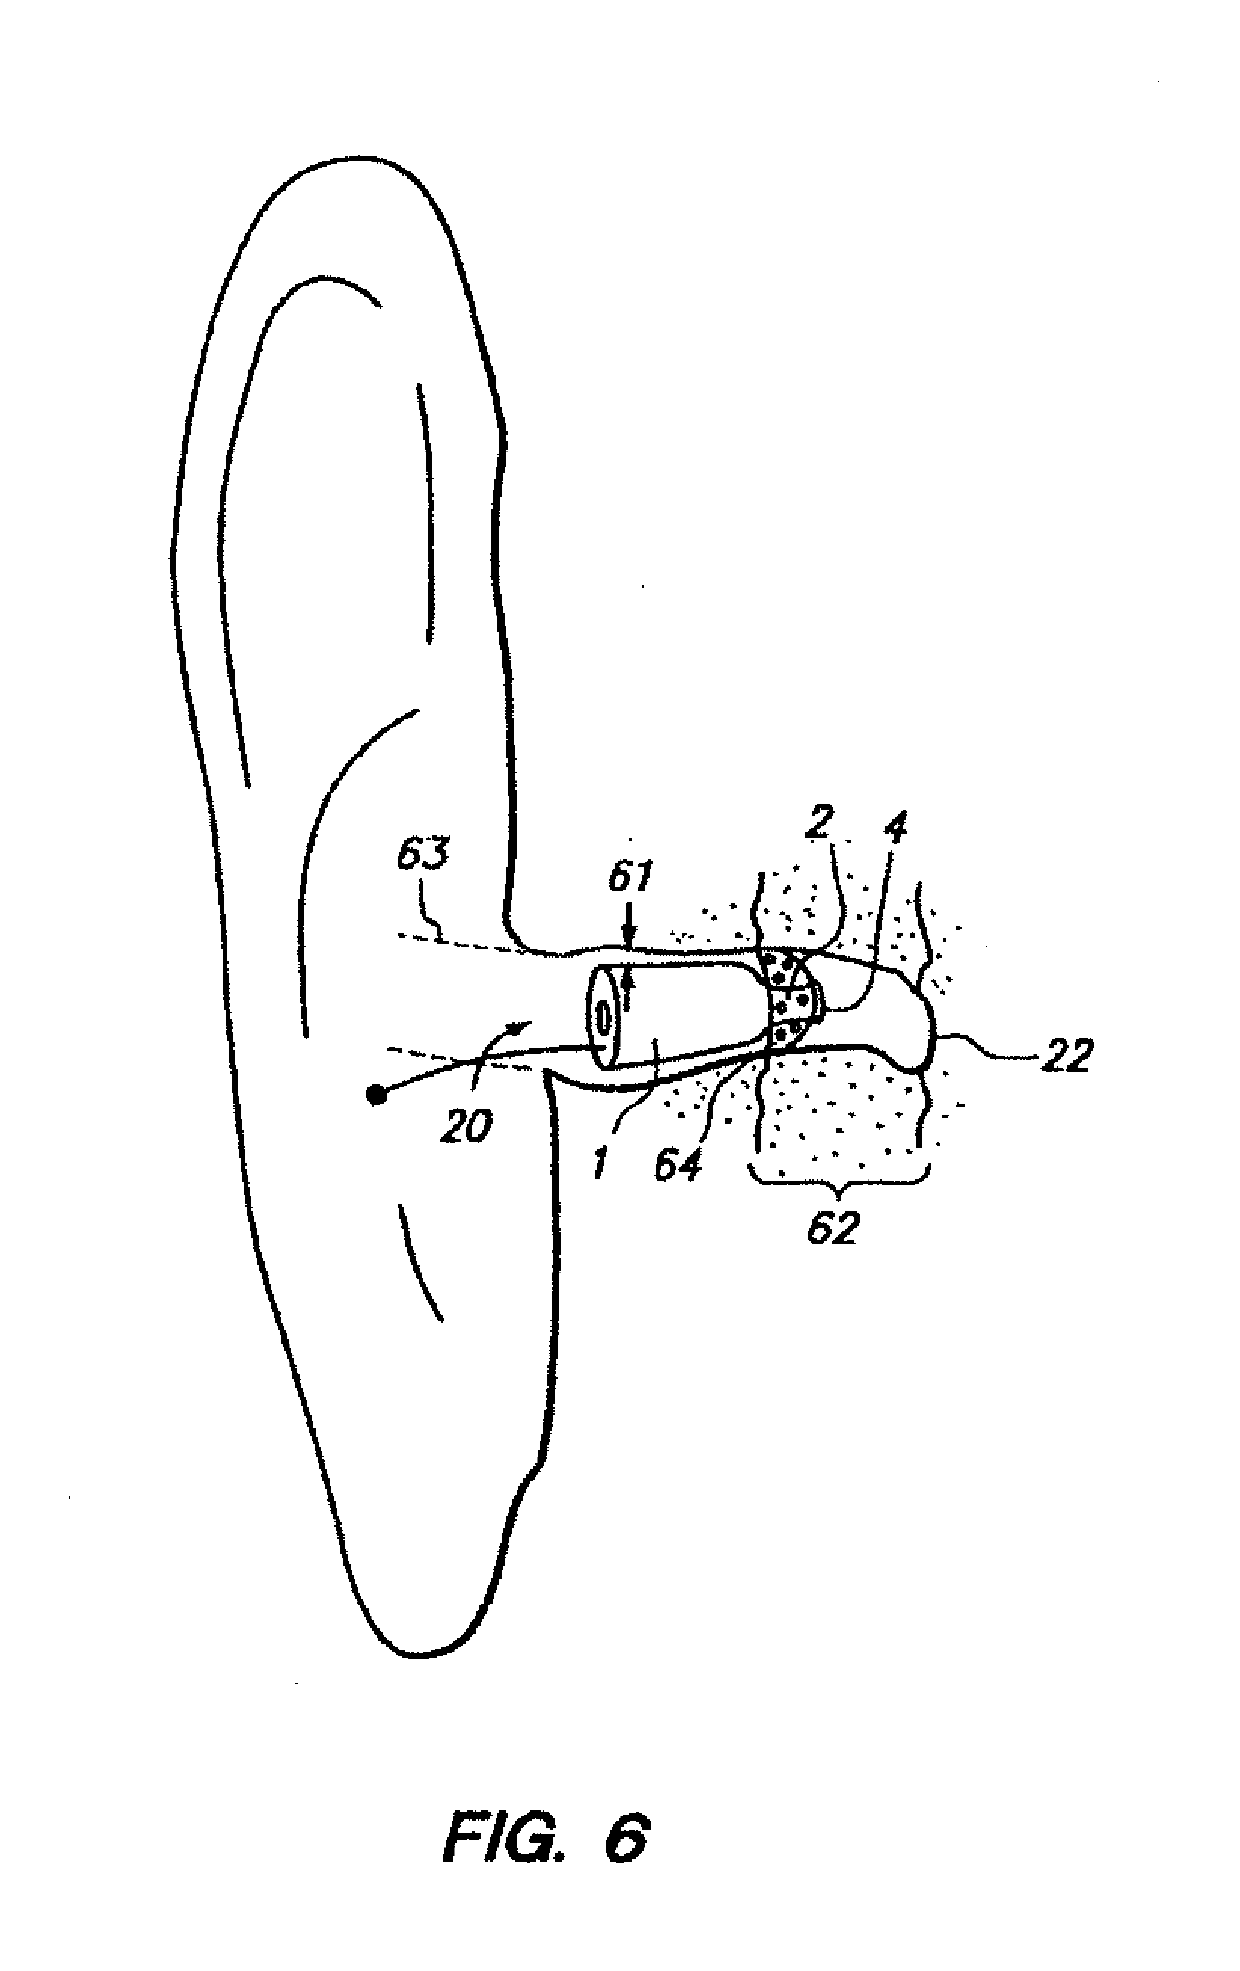 Open fit canal hearing device